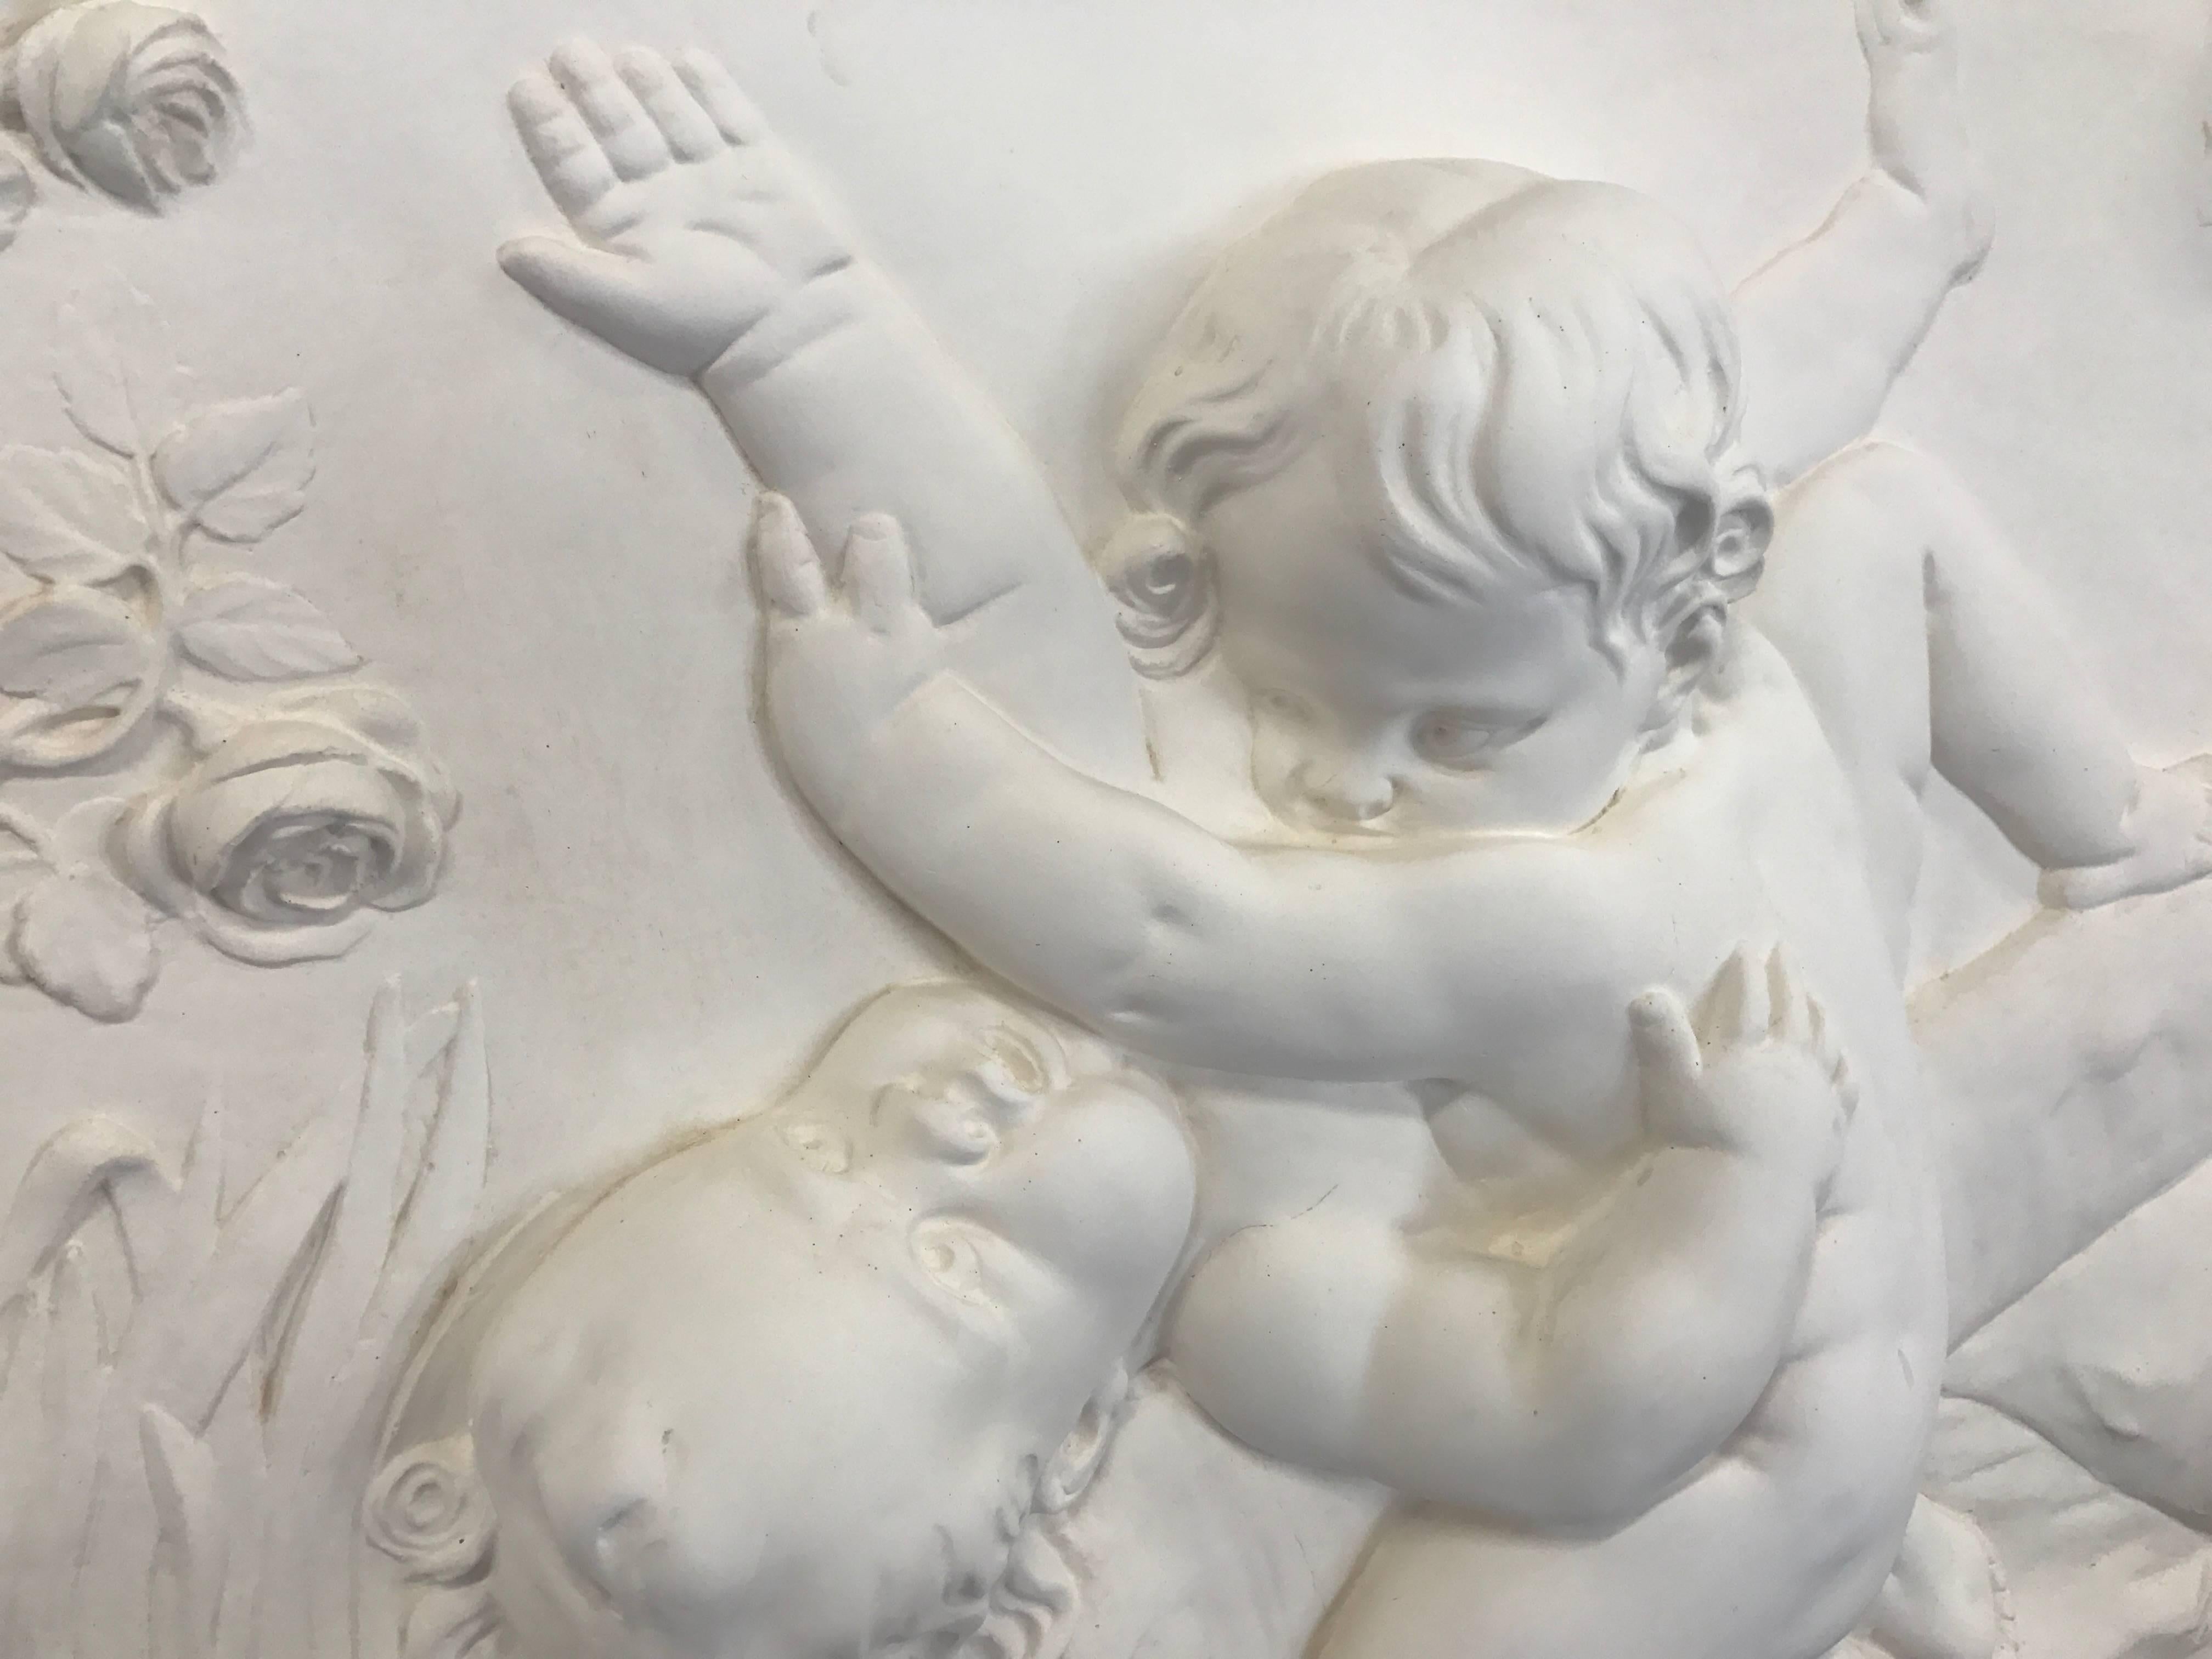 Art reproduction in plaster, Enfant a la balancoire, children playing on a swing. Measures: 150x65x8 cm.
This large bas-relief adorns the Hotel Ephrussi residence, located at the Place des Etats-Unis in Paris. The private residence was built at the